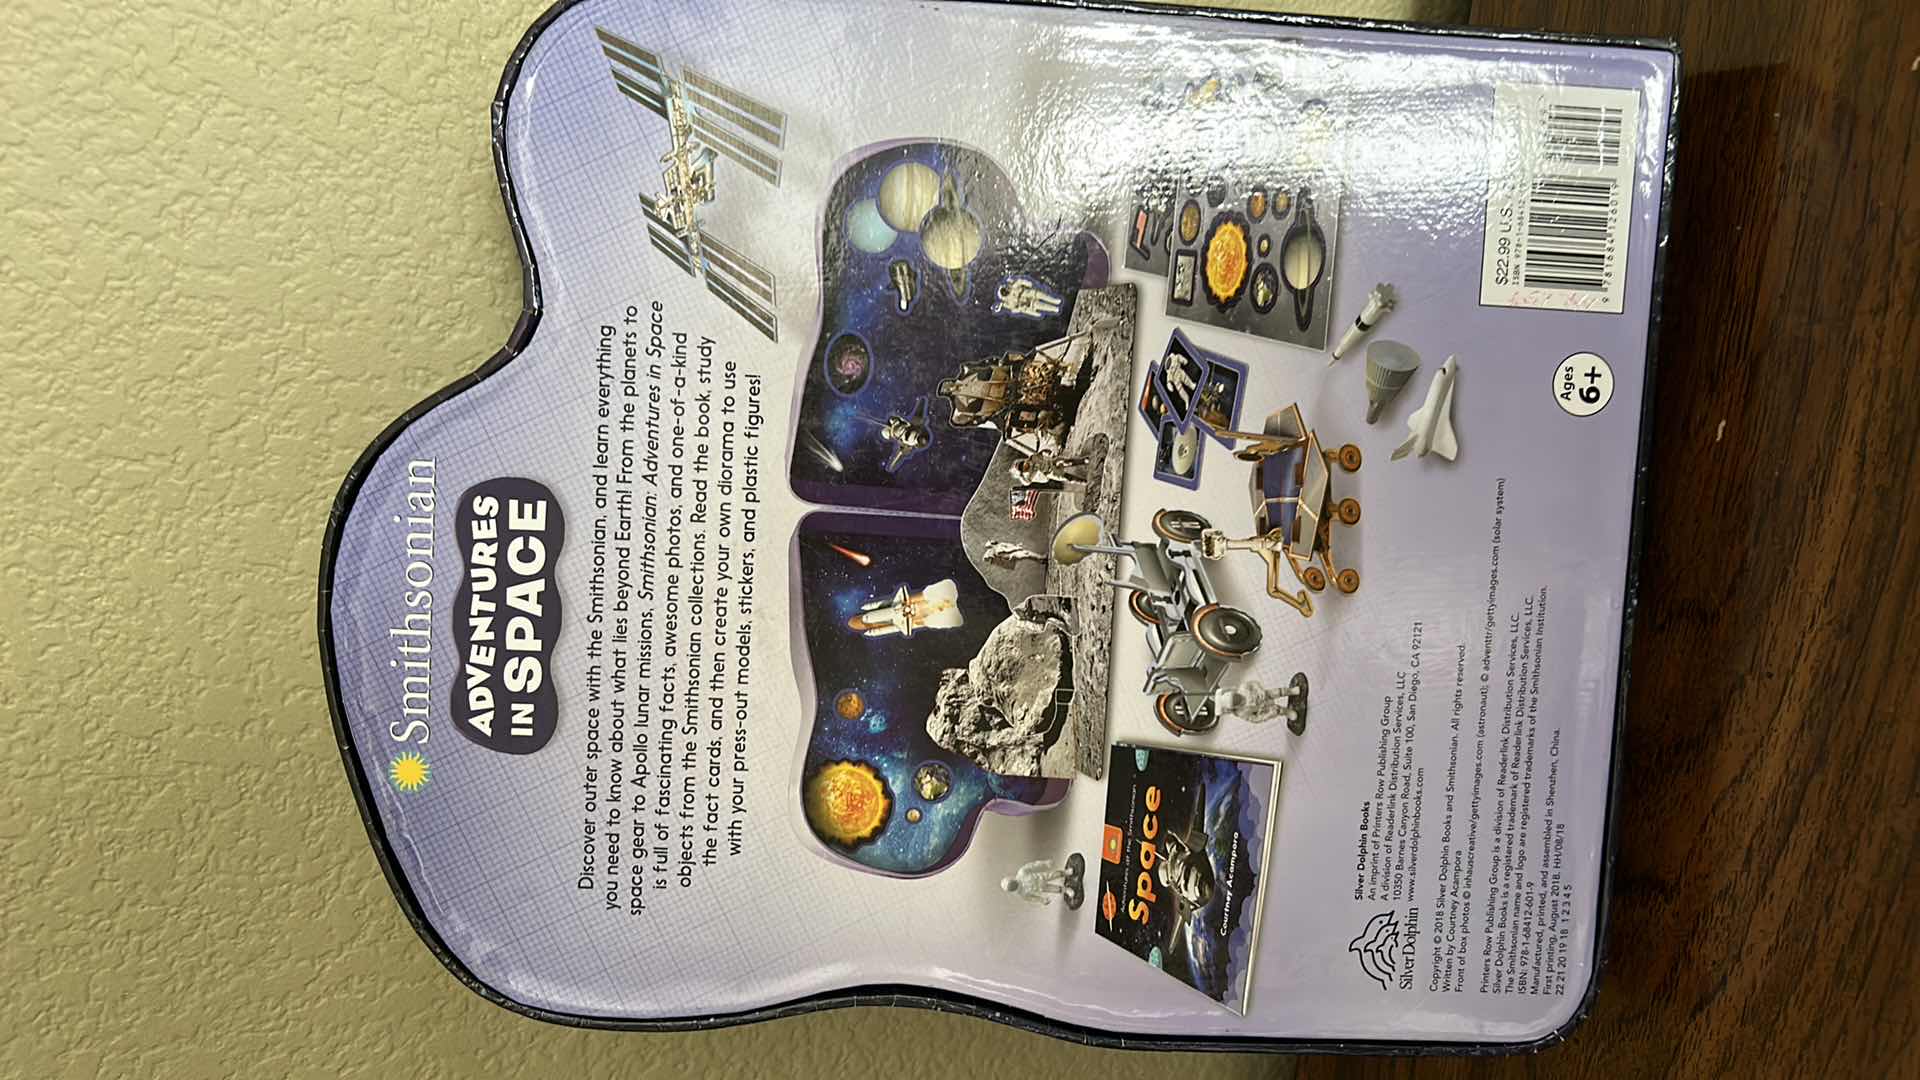 Photo 4 of 2 NEW BOXED SETS - STAR WARS AND SMITHSONIAN ADVENTURES IN SPACE